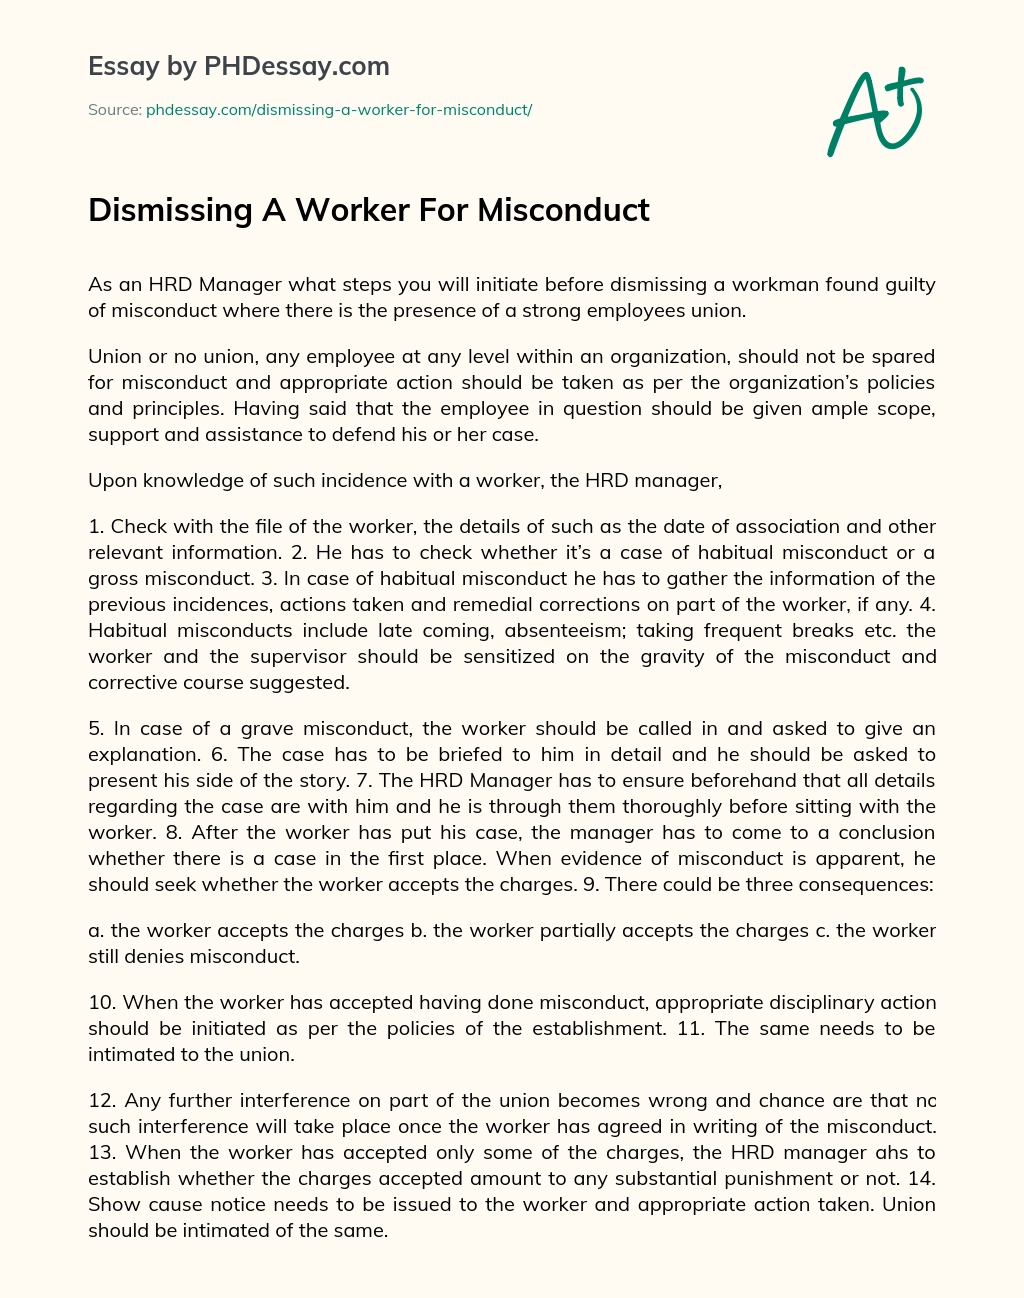 Dismissing A Worker For Misconduct essay